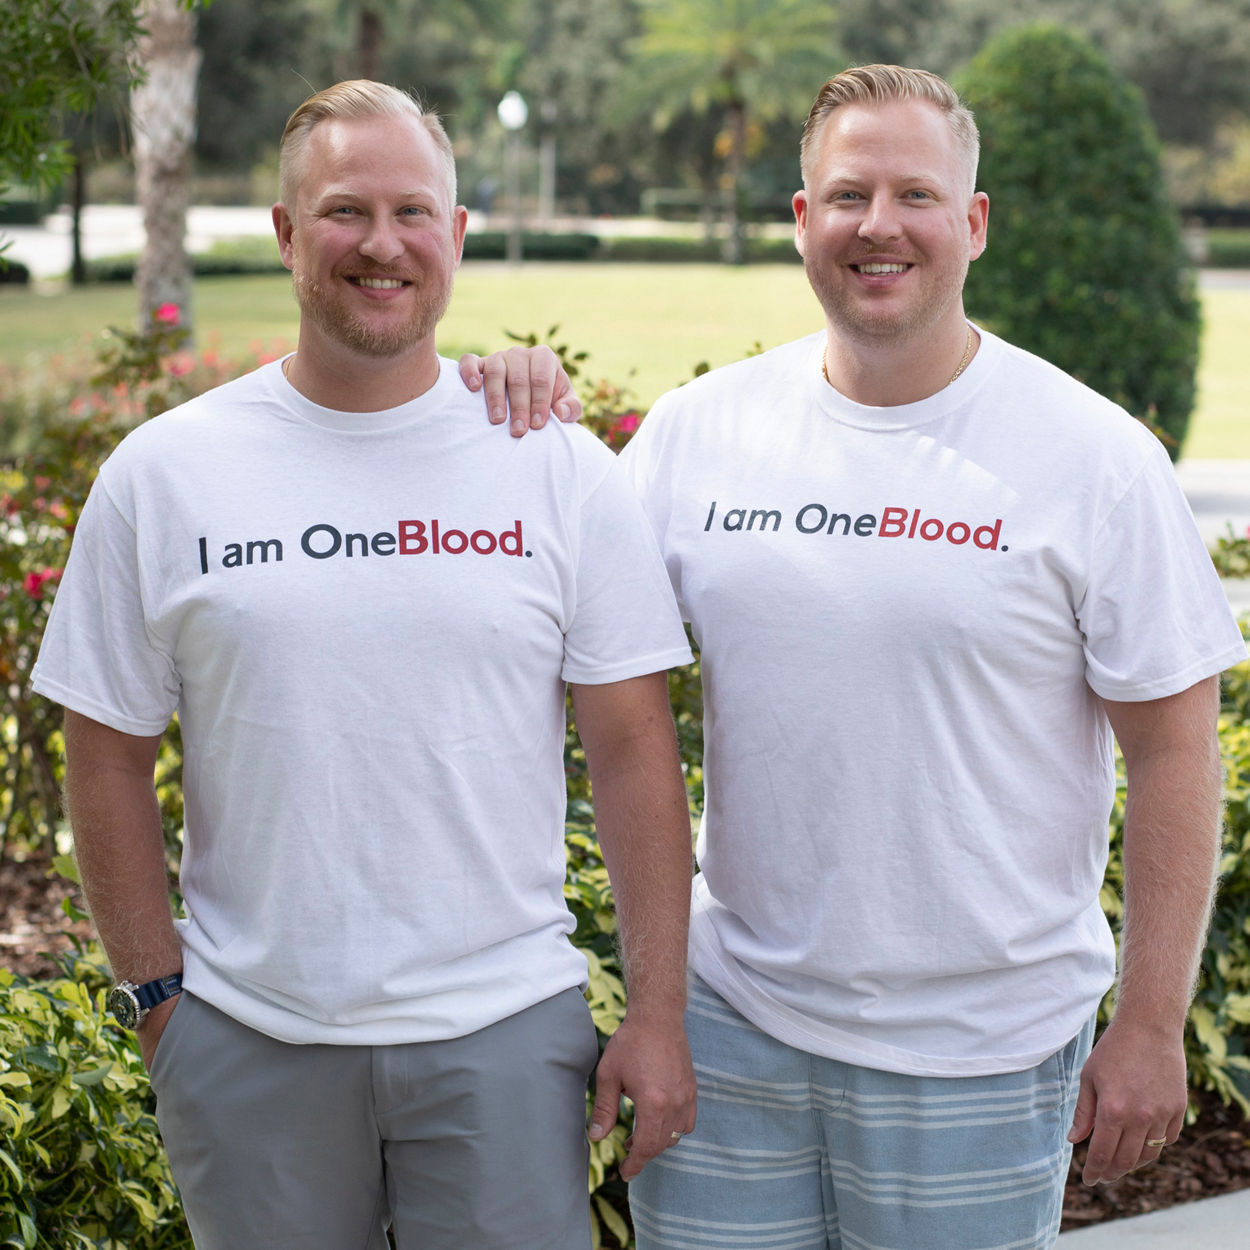 Stephen and Michael I am OneBlood March 2019